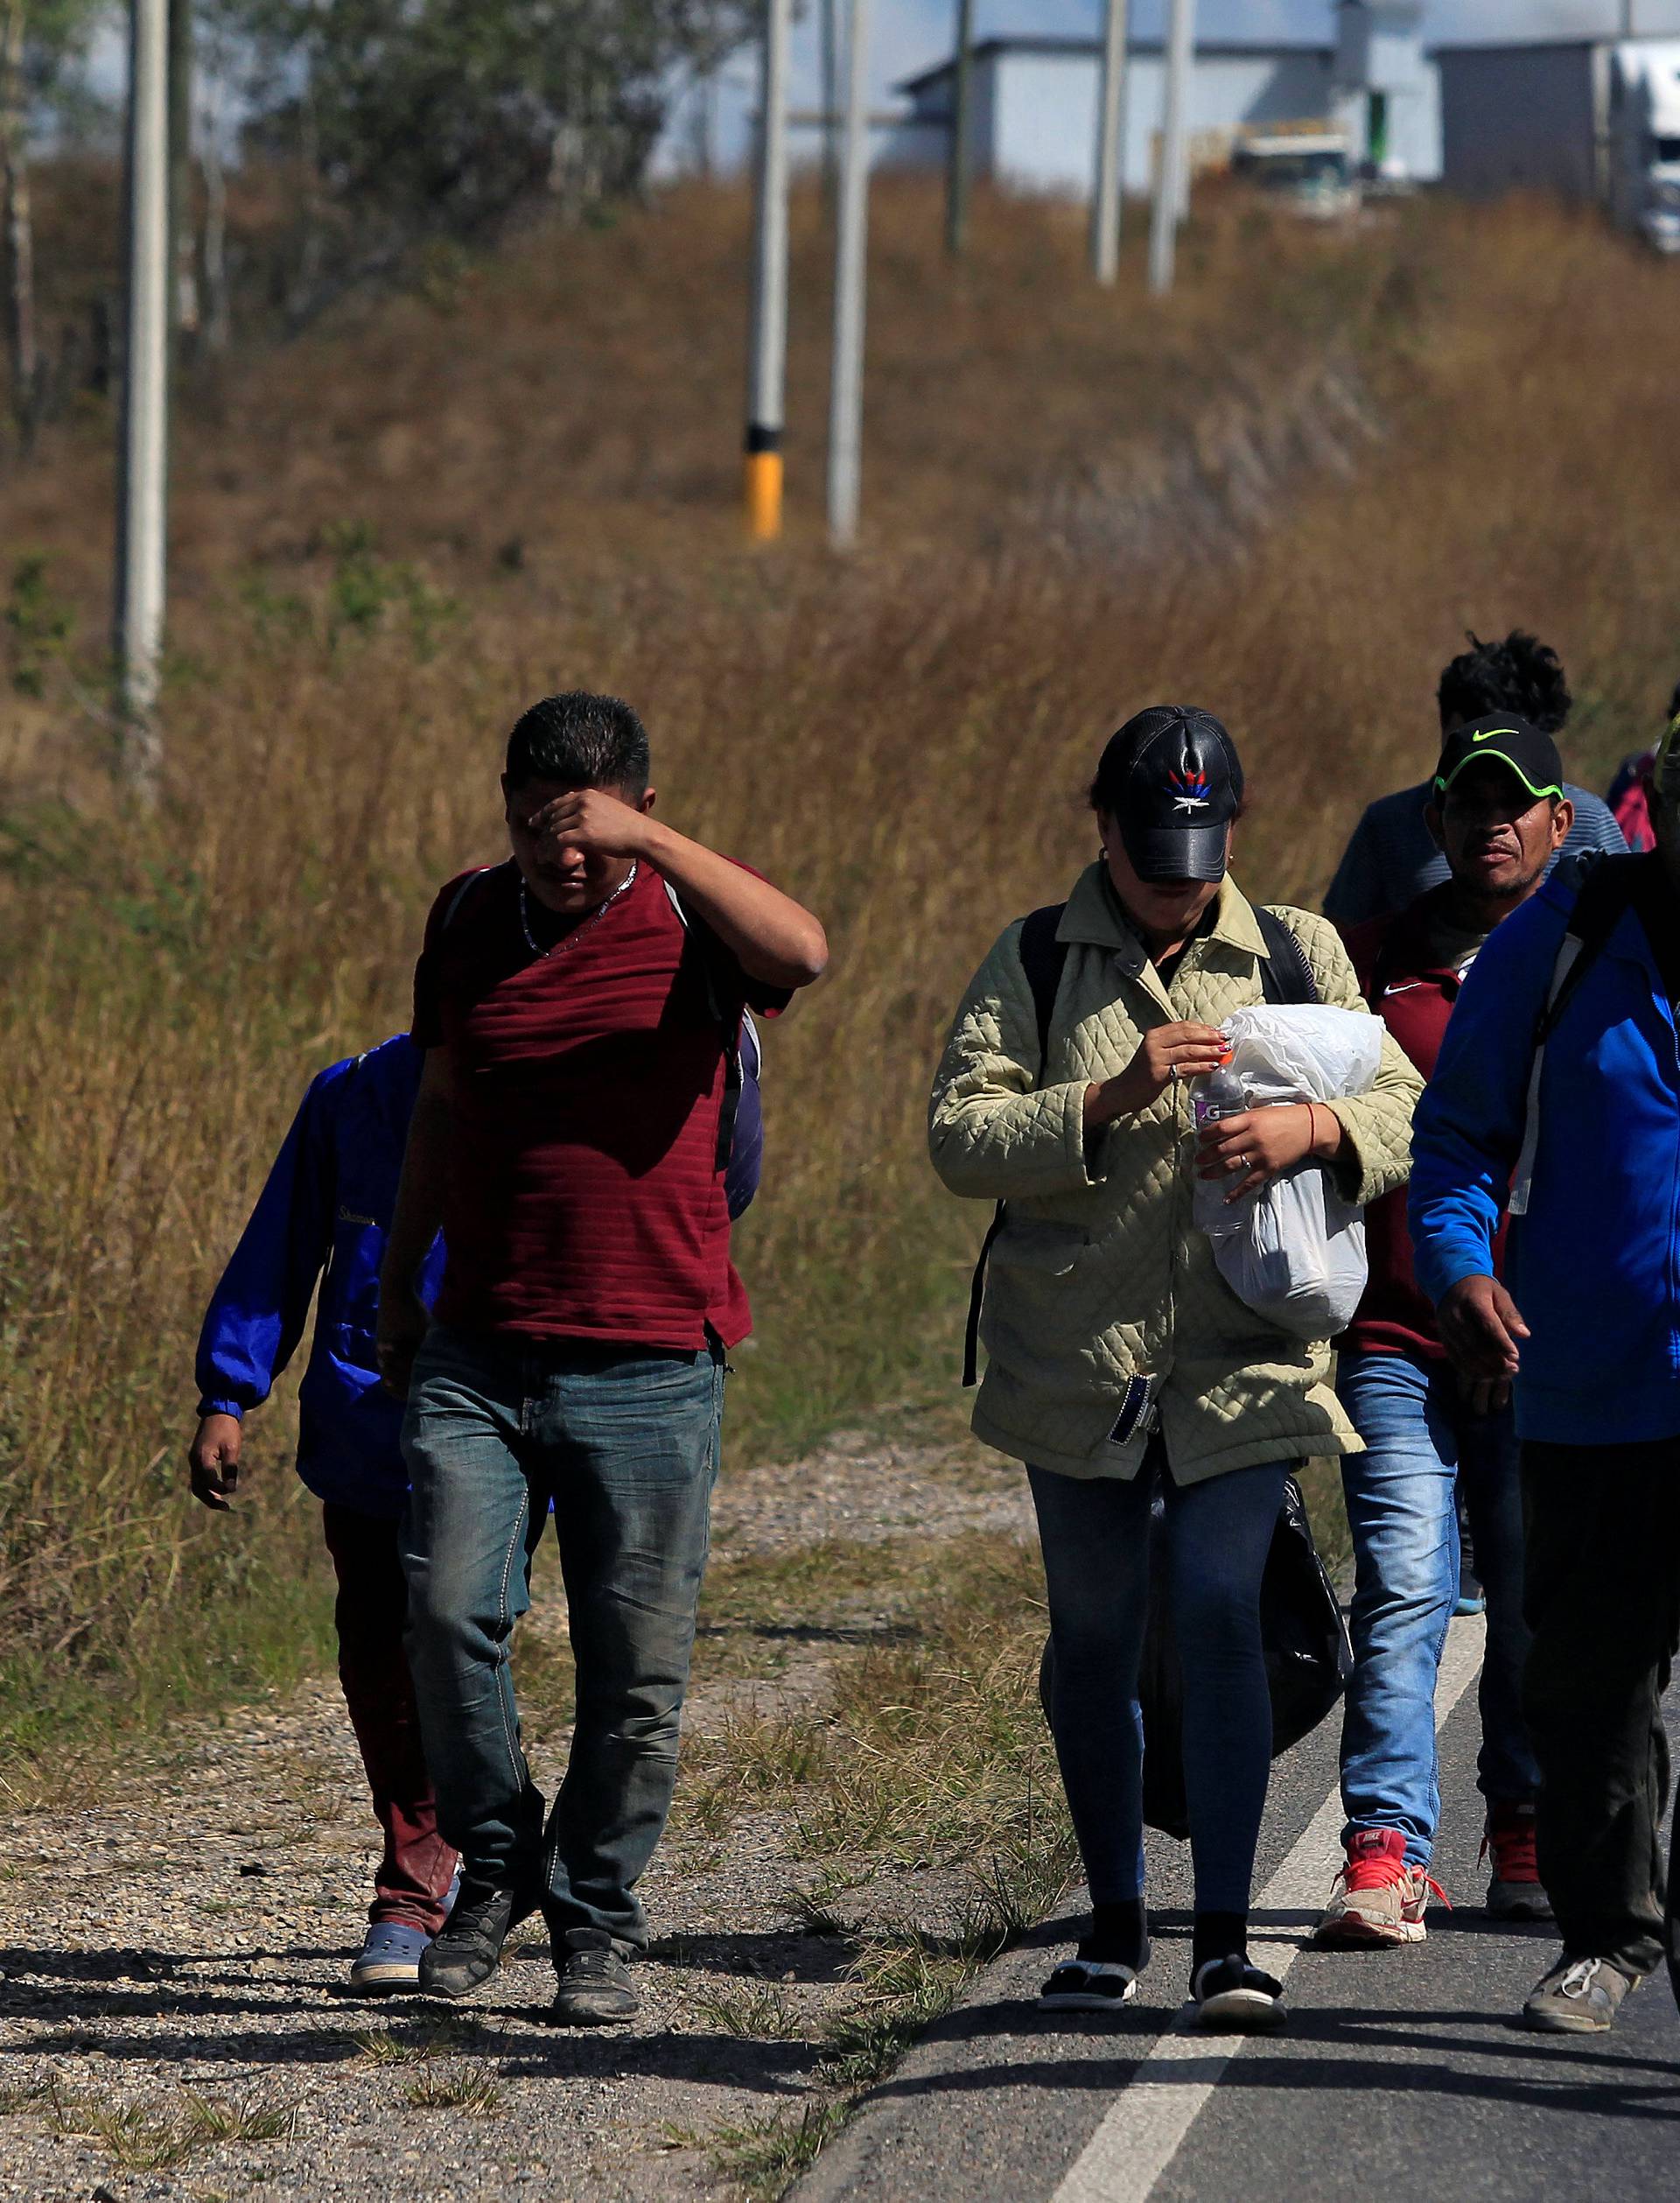 Hondurans, part of a new caravan of migrants travelling towards the United States, walk along a road in Cucuyagua